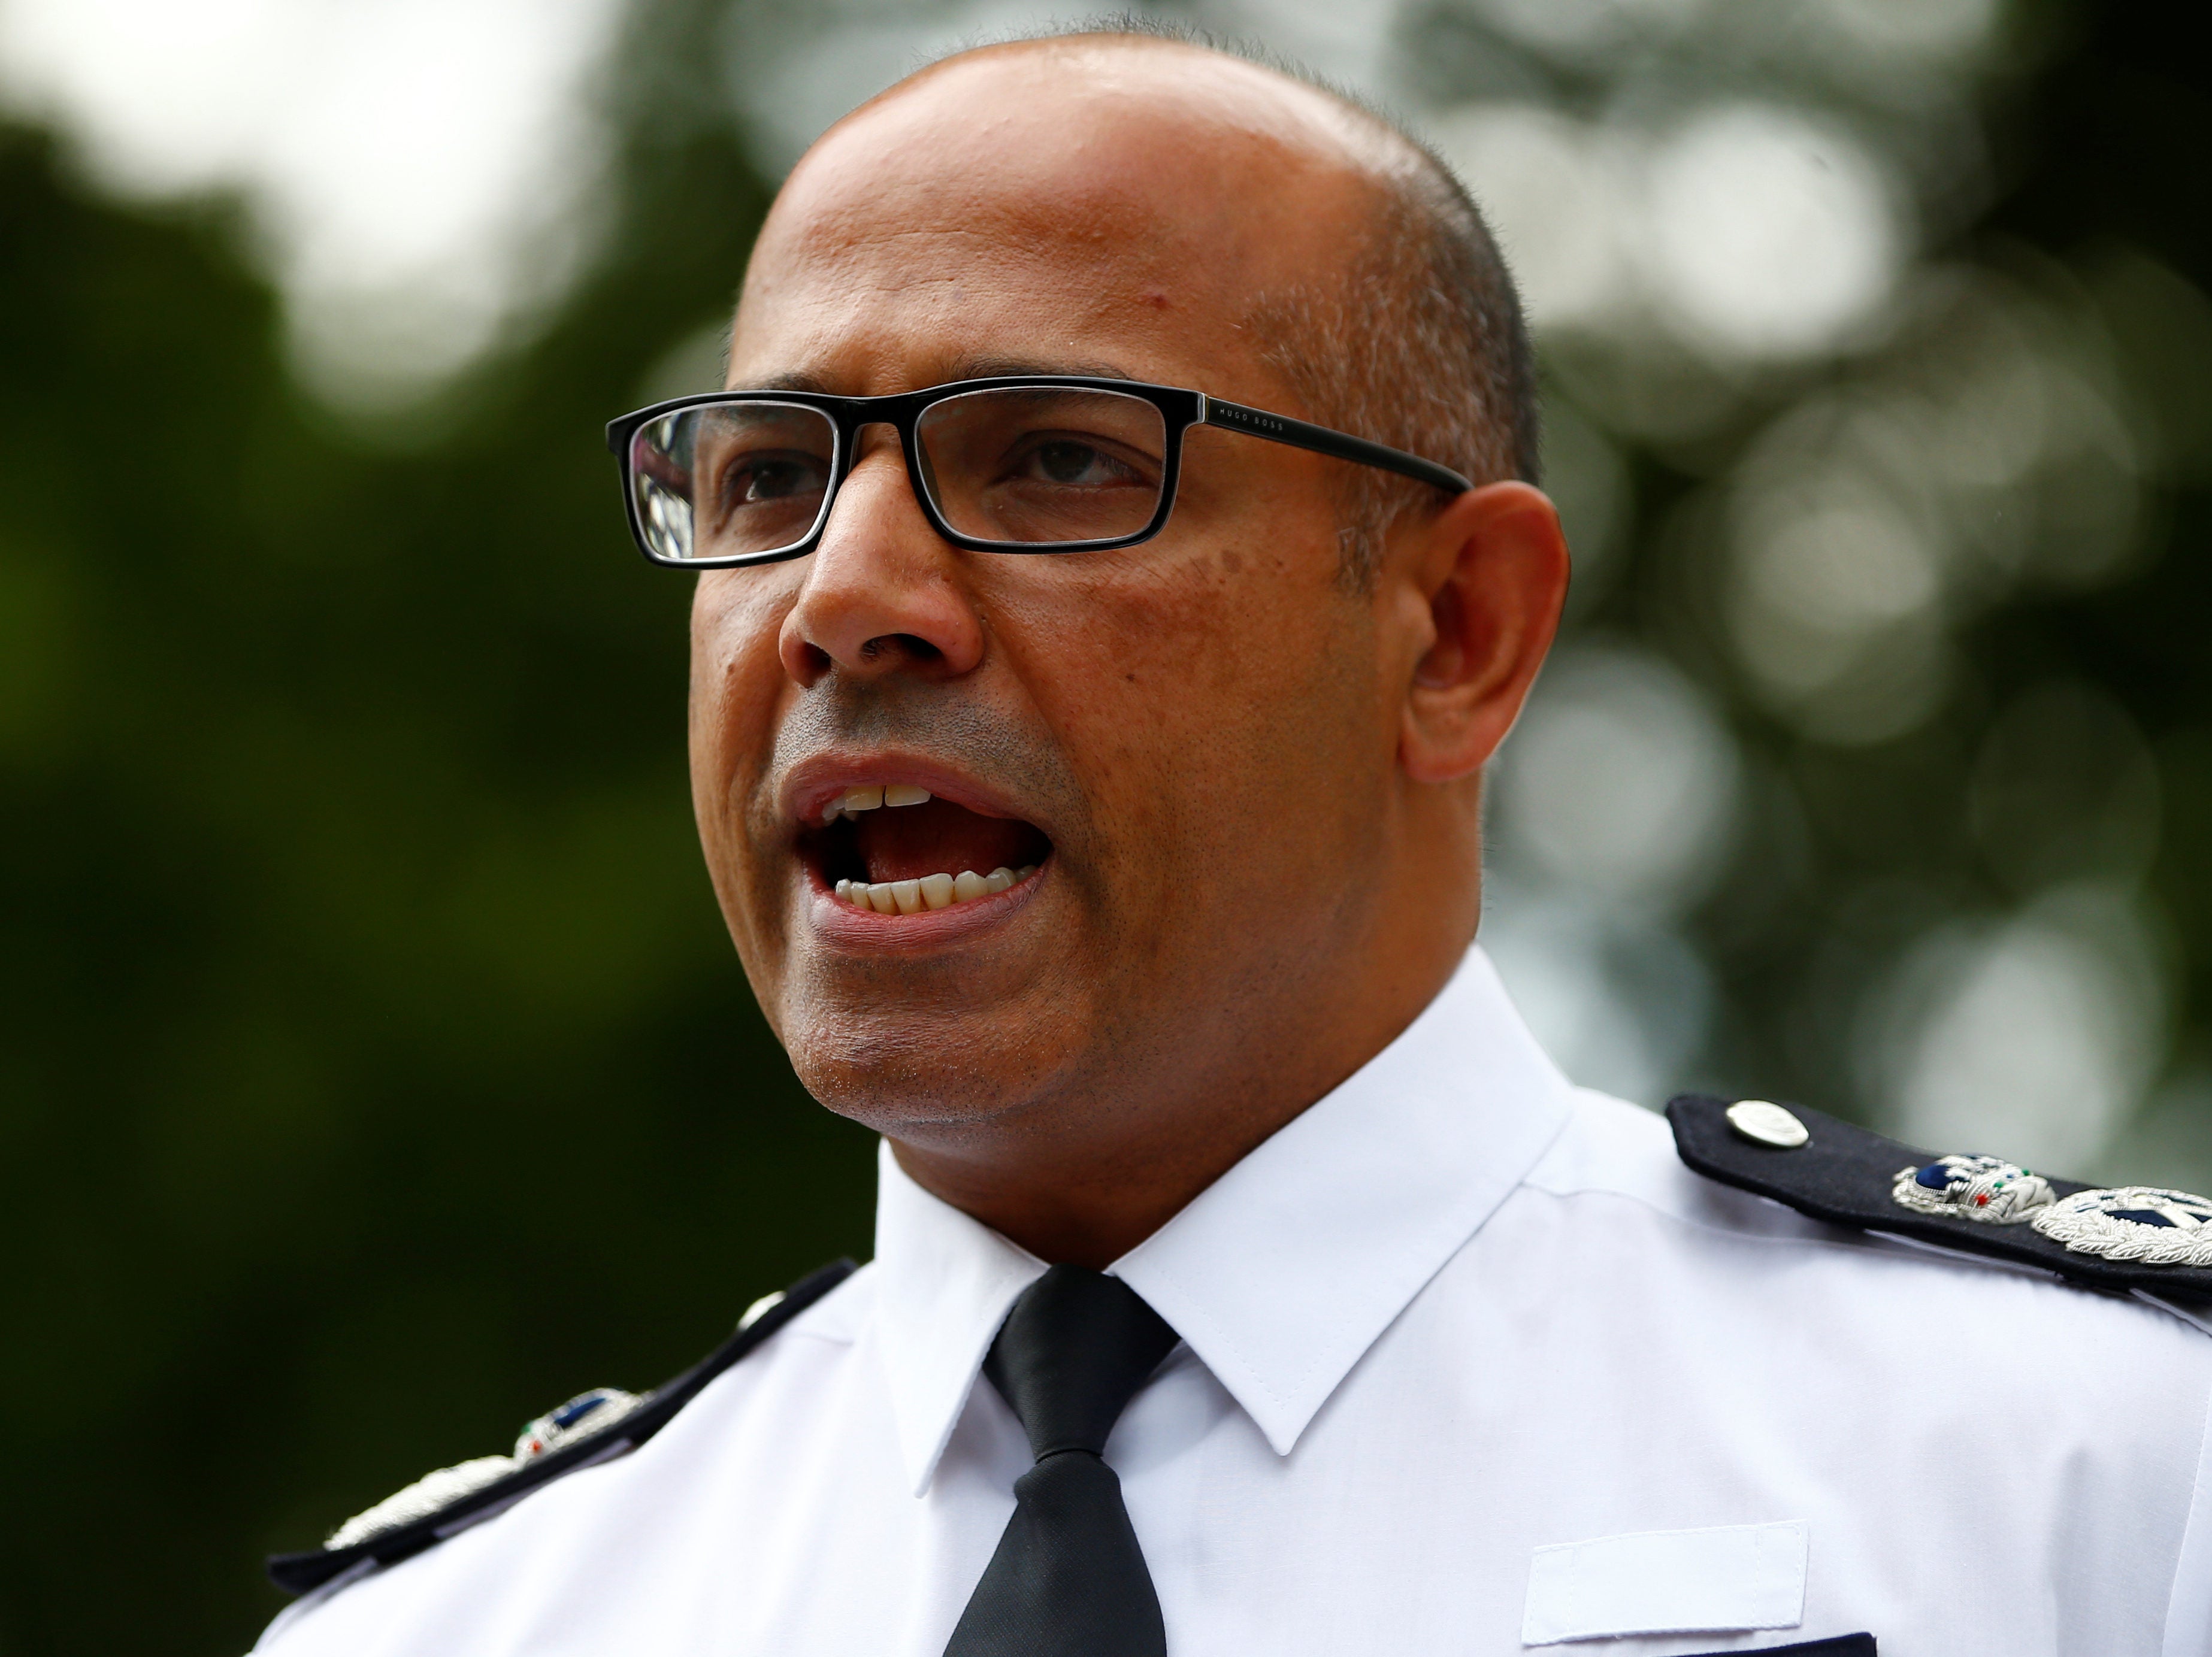 Anti-terror police chief to speak at Society of Editors' annual conference next month